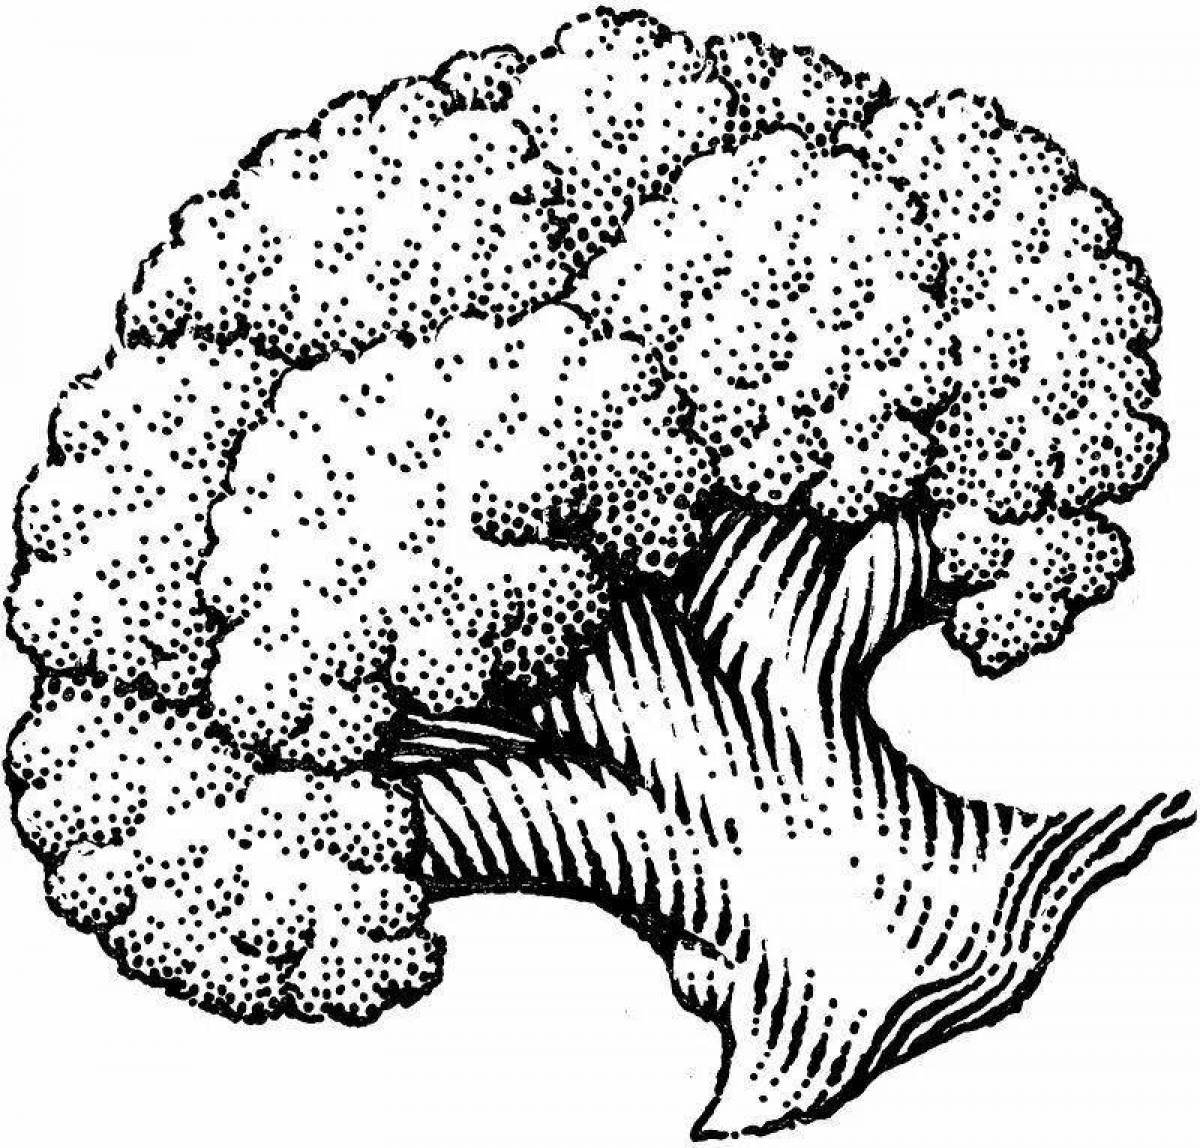 Surreal coloring of cauliflower